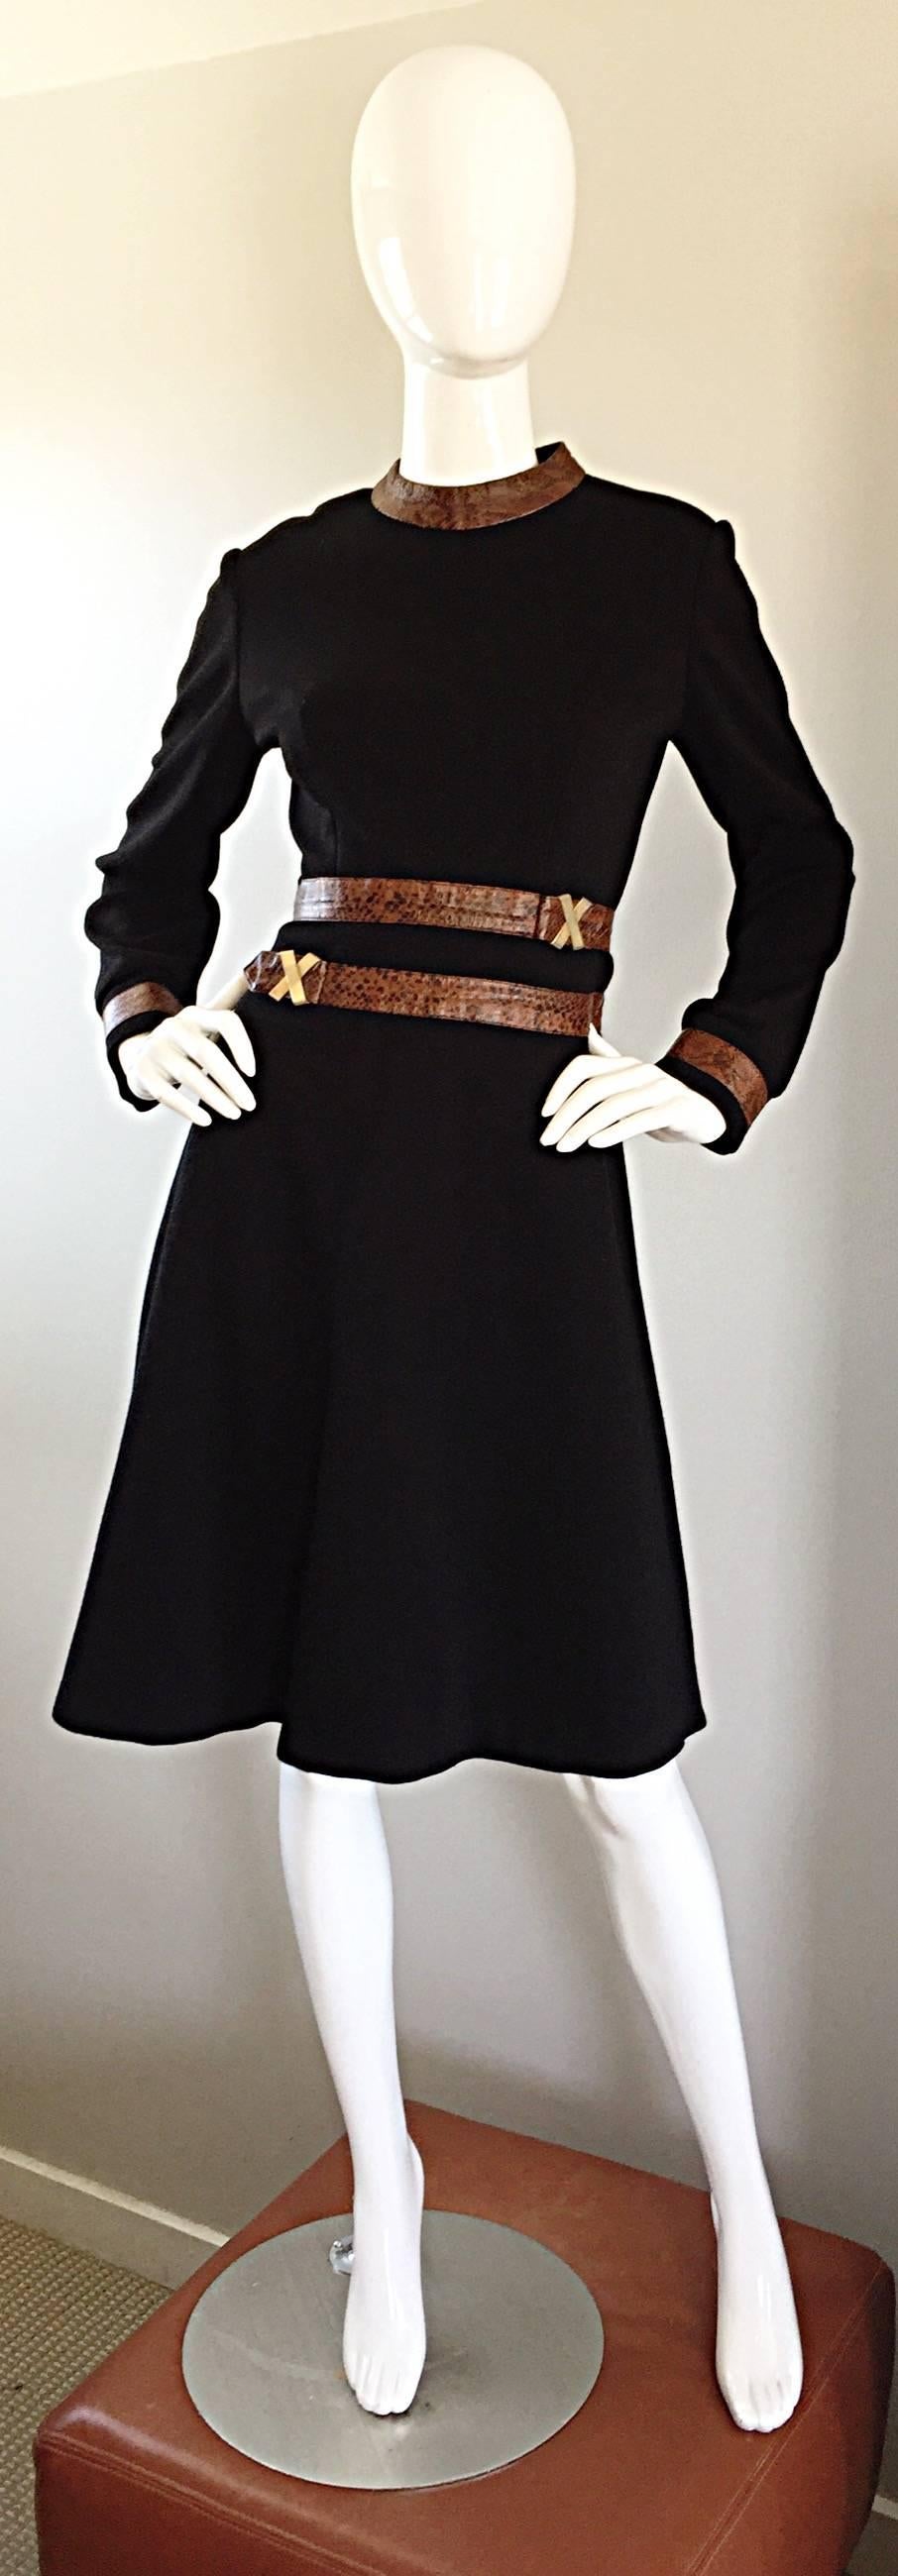 Rare, and simply stunning vintage 60s LOUIS FERAUD long sleeve A-Line dress! Jet black knitted wool, with alligator embossed brown leather accents at waist and collar. Gold/brass 'Paloma Picasso' style metal X's on each side of the waist. Sleek